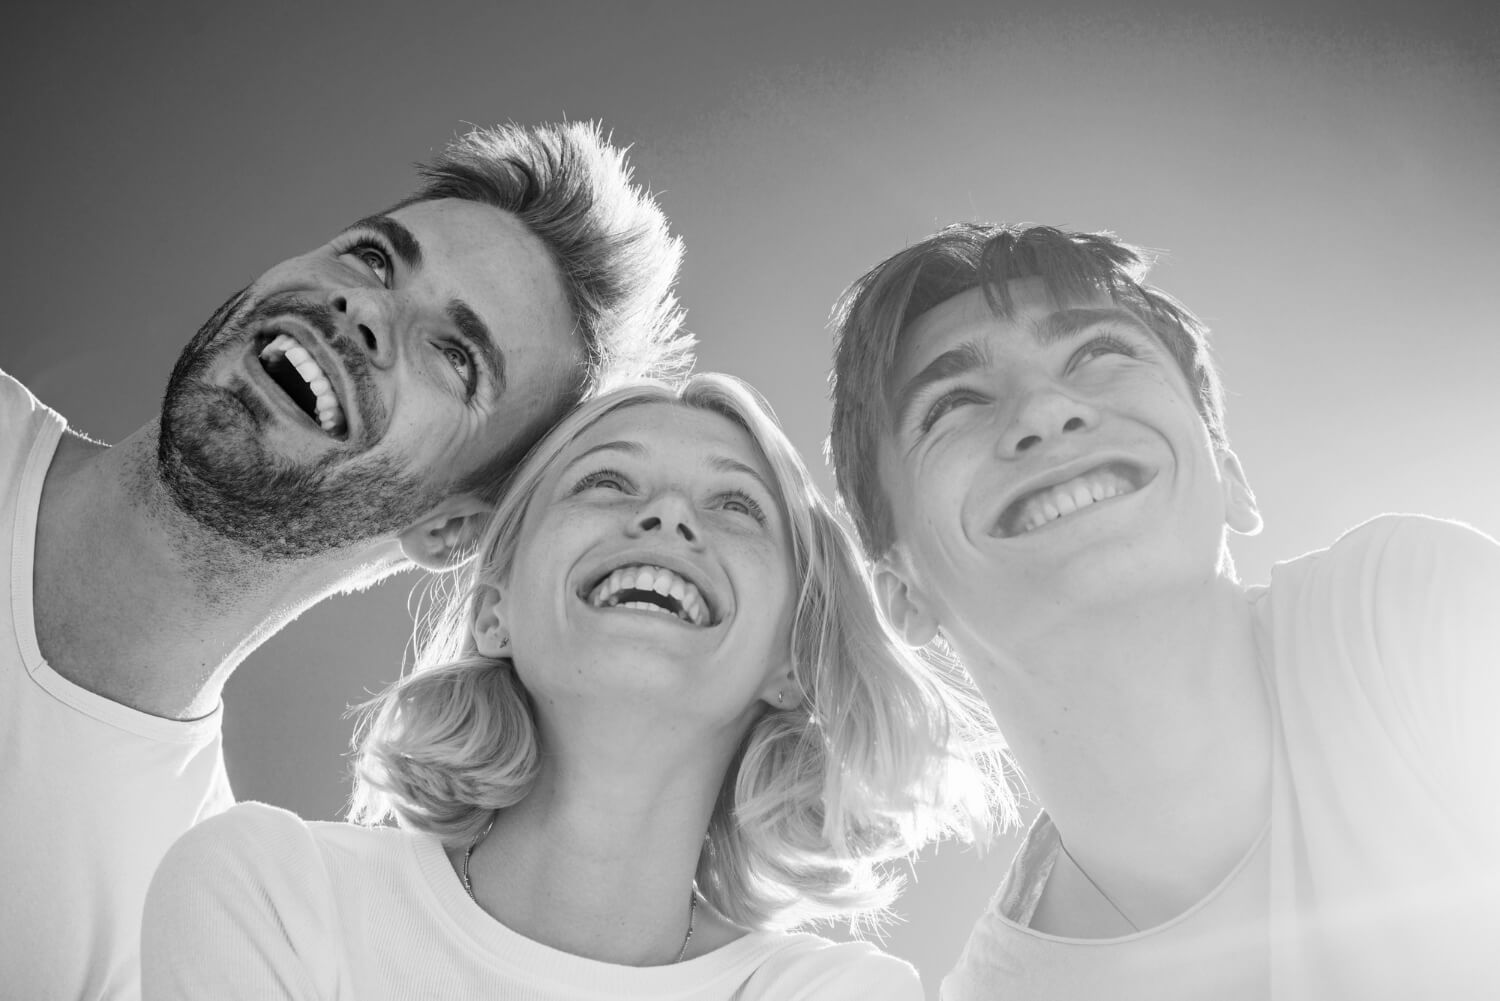 People laughing together showcasing the power of laughter and positivity